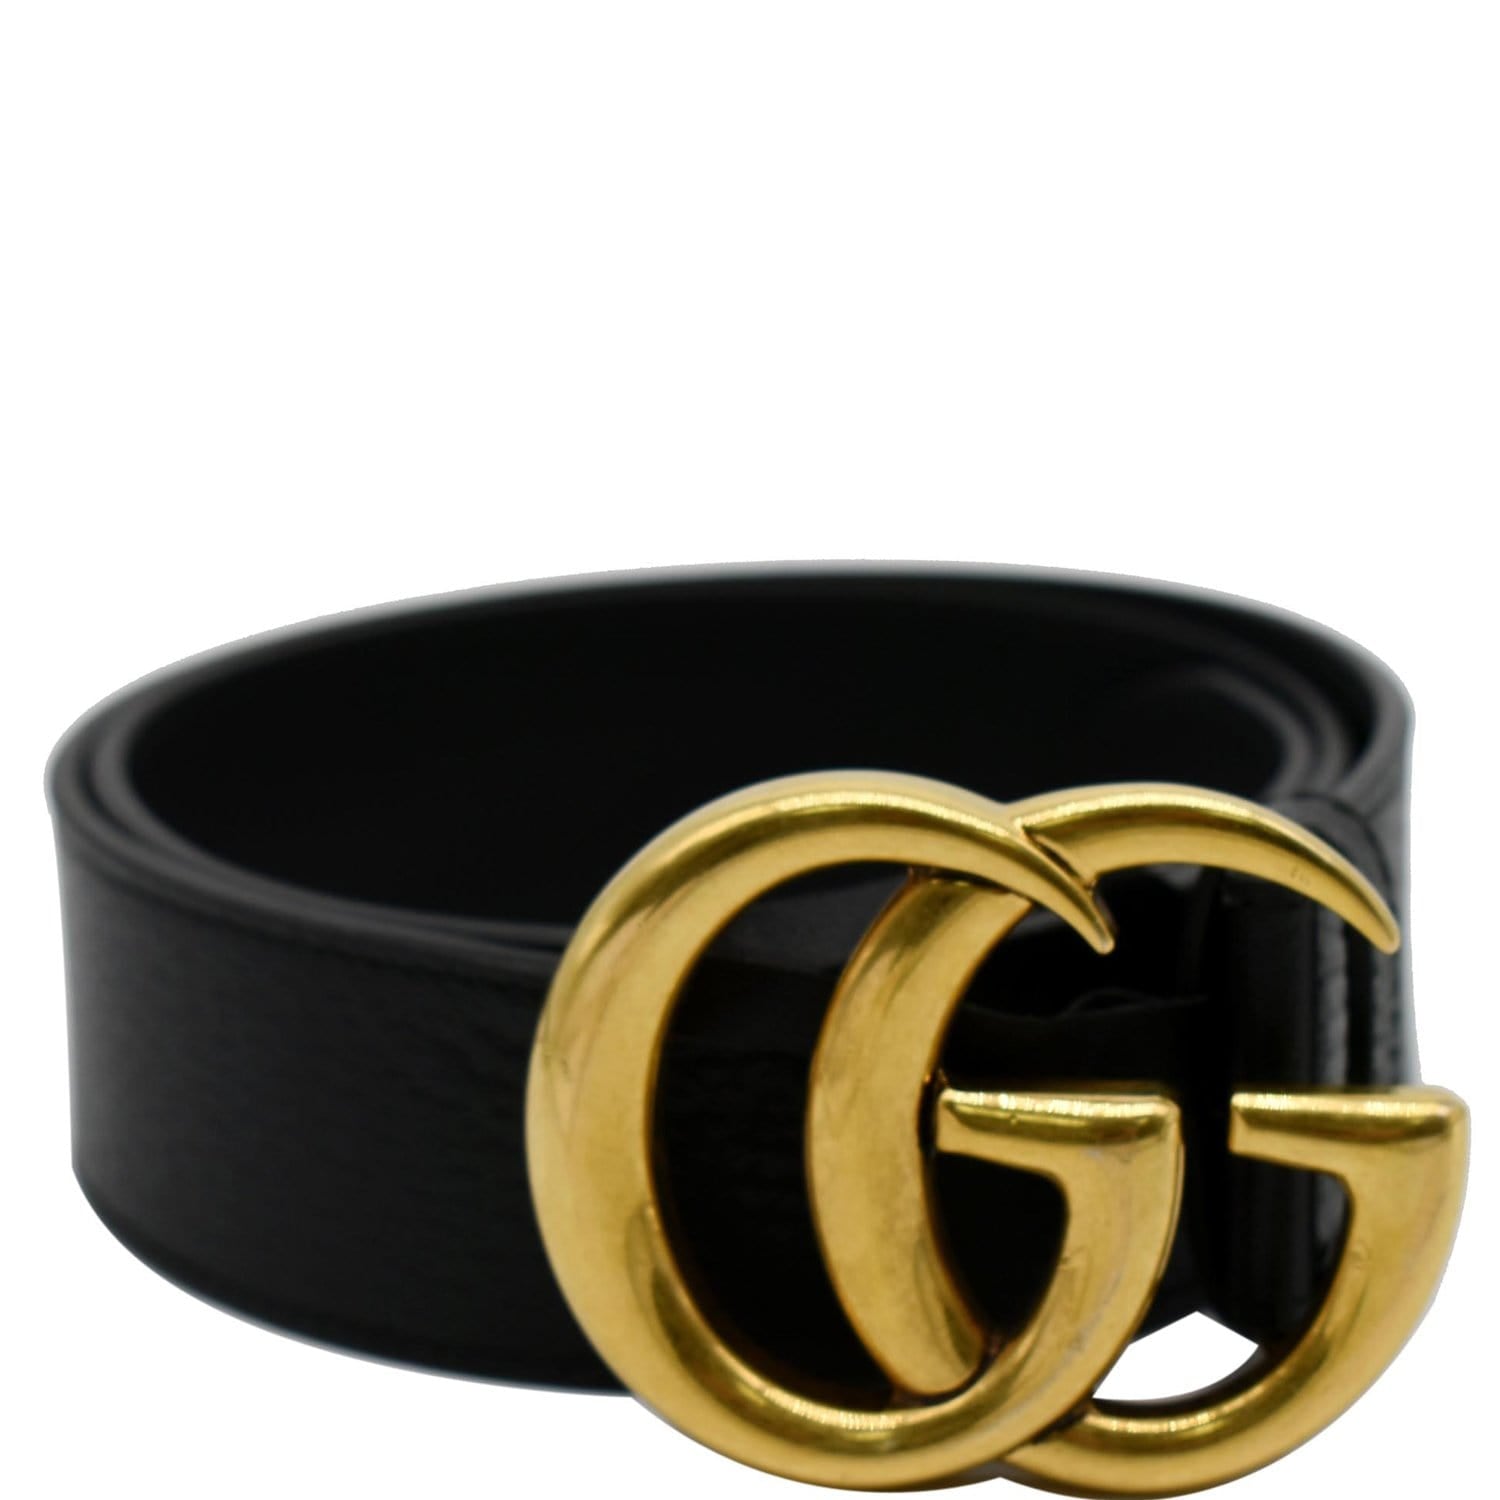 Gucci Leather Belt with Double G Buckle - Black - Belts